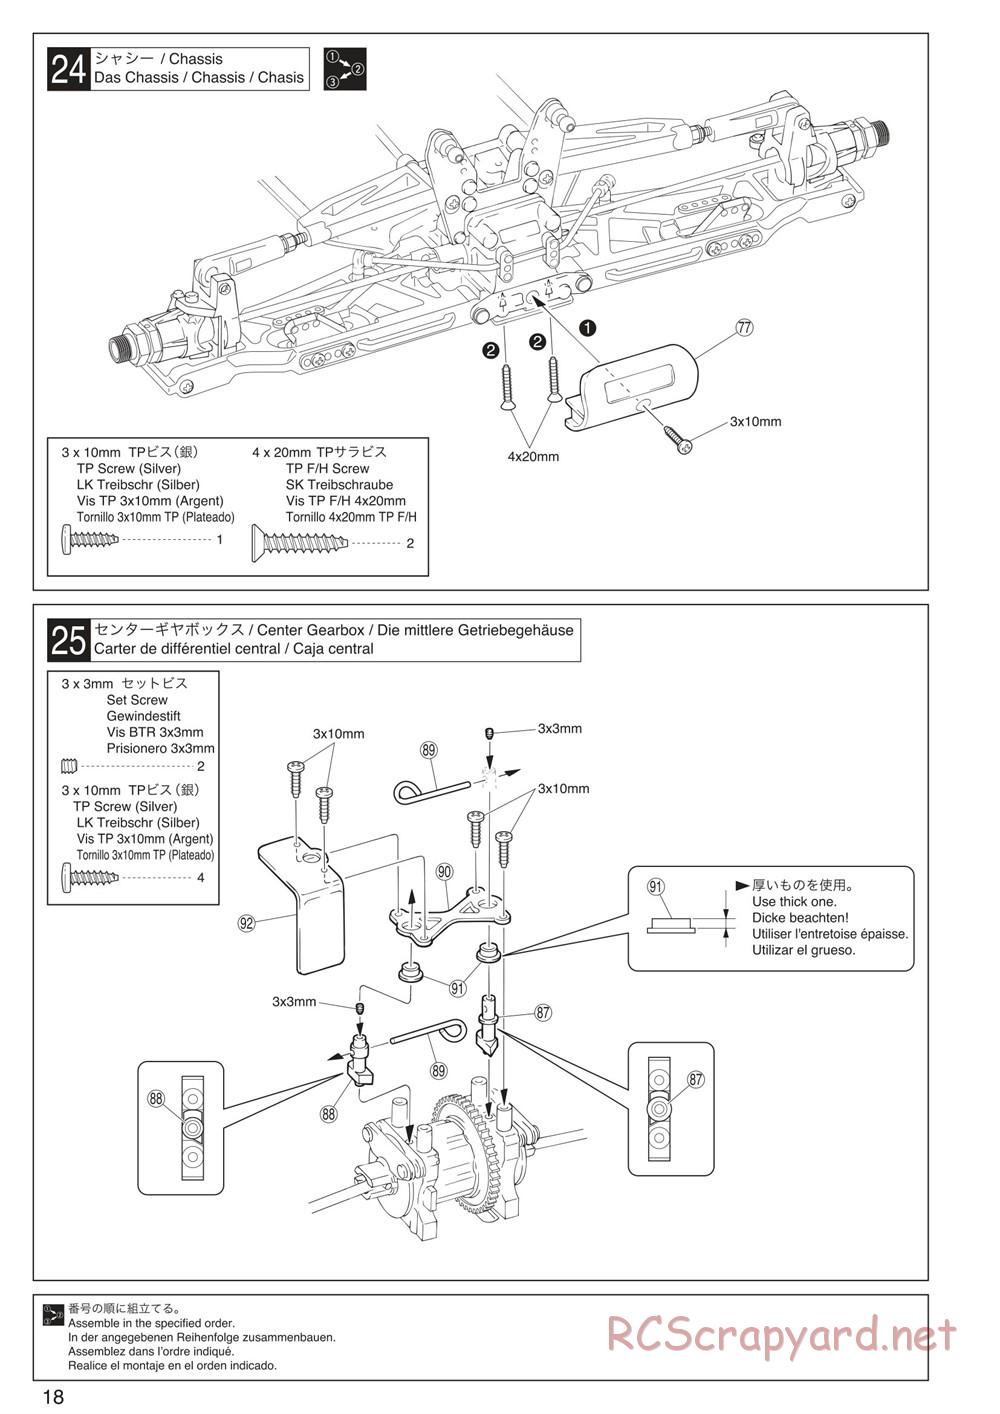 Kyosho - Inferno Neo ST 3.0 - Manual - Page 18